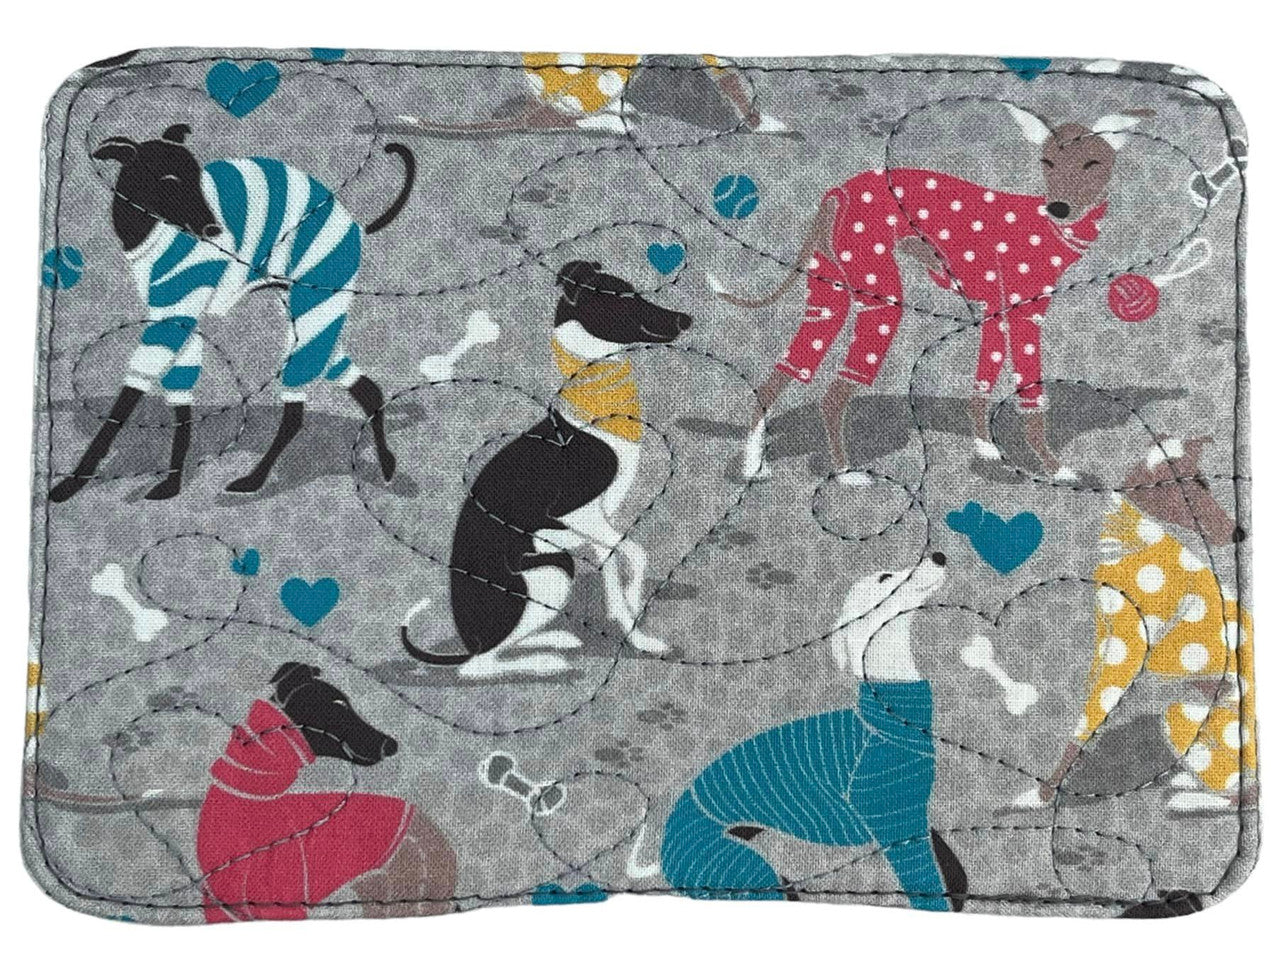 Mug Rug - Whippets in Jammies Italian Greyhounds Grey Quilted Hearts